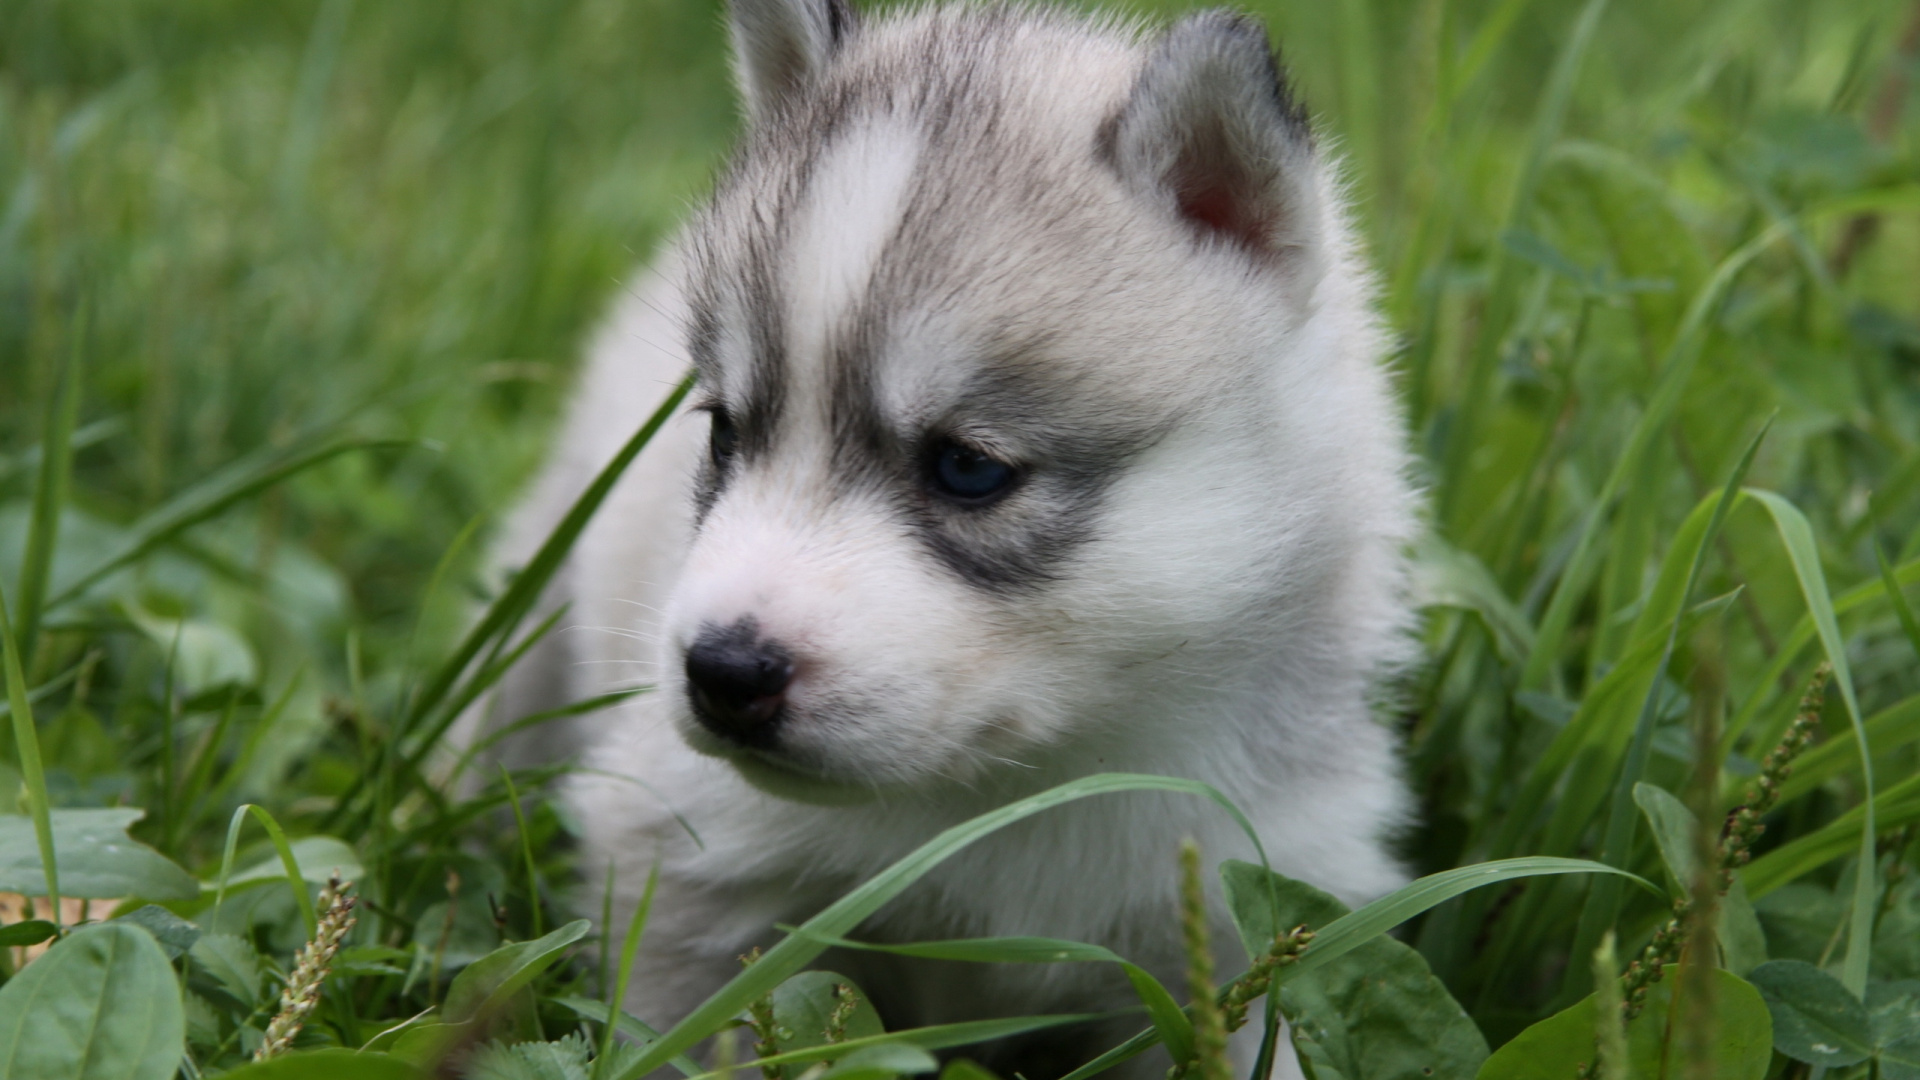 White and Black Siberian Husky Puppy on Green Grass During Daytime. Wallpaper in 1920x1080 Resolution